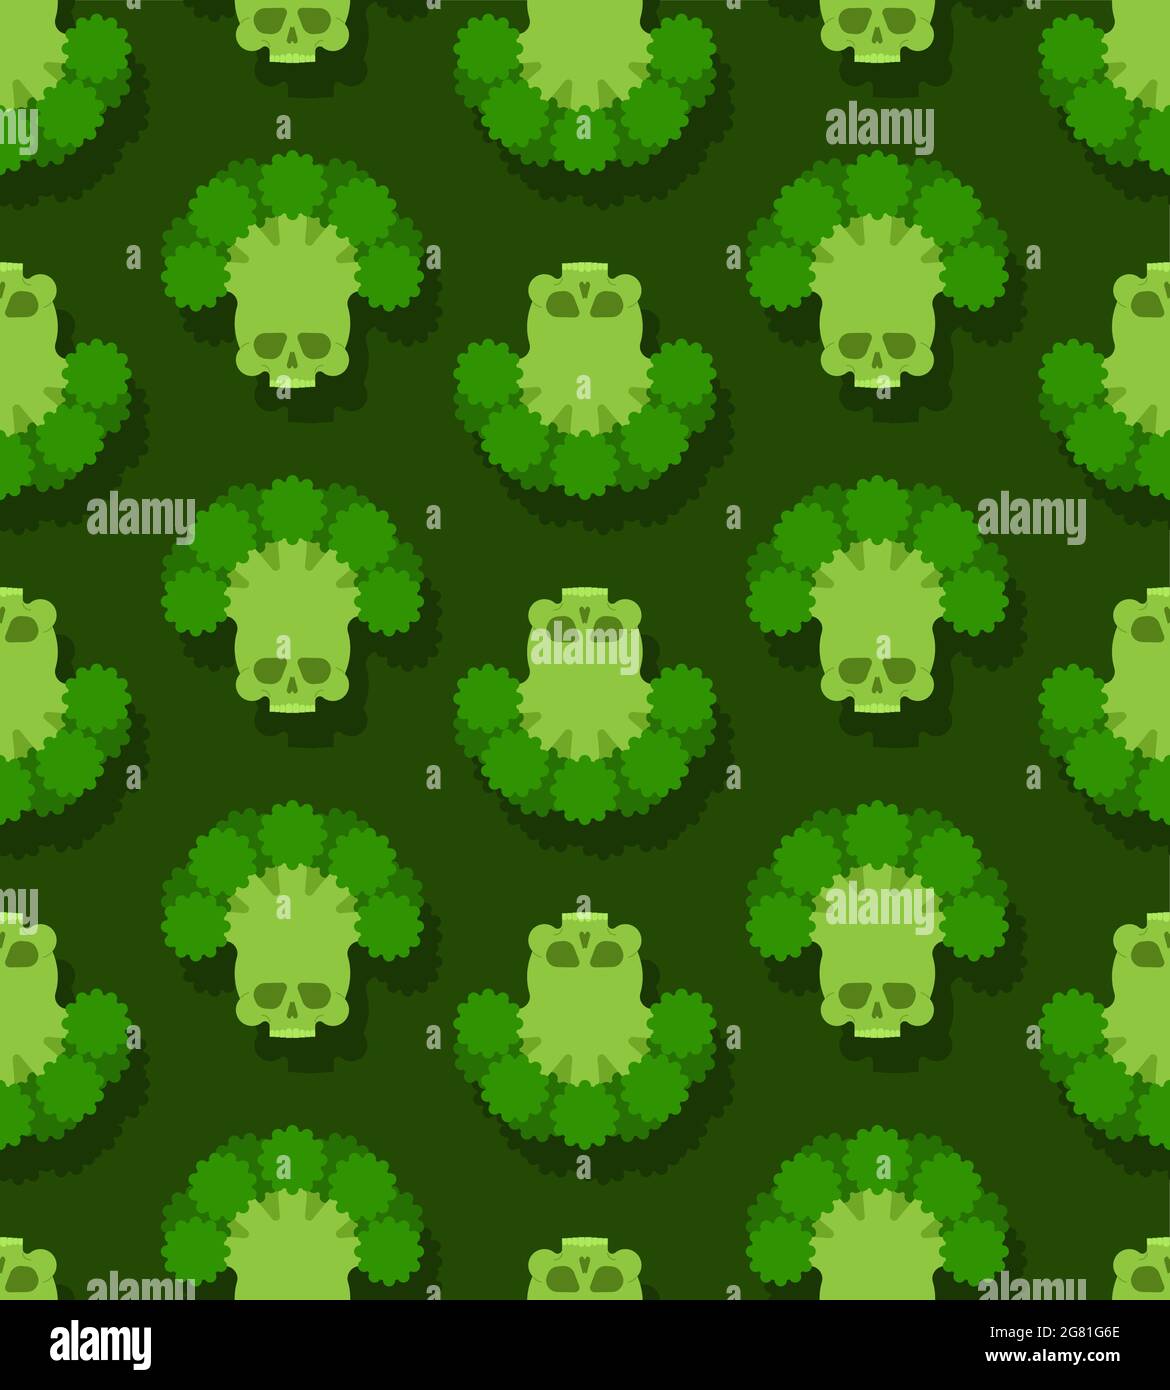 Skull broccoli pattern seamless. Deadly scary vegetable background Stock Vector